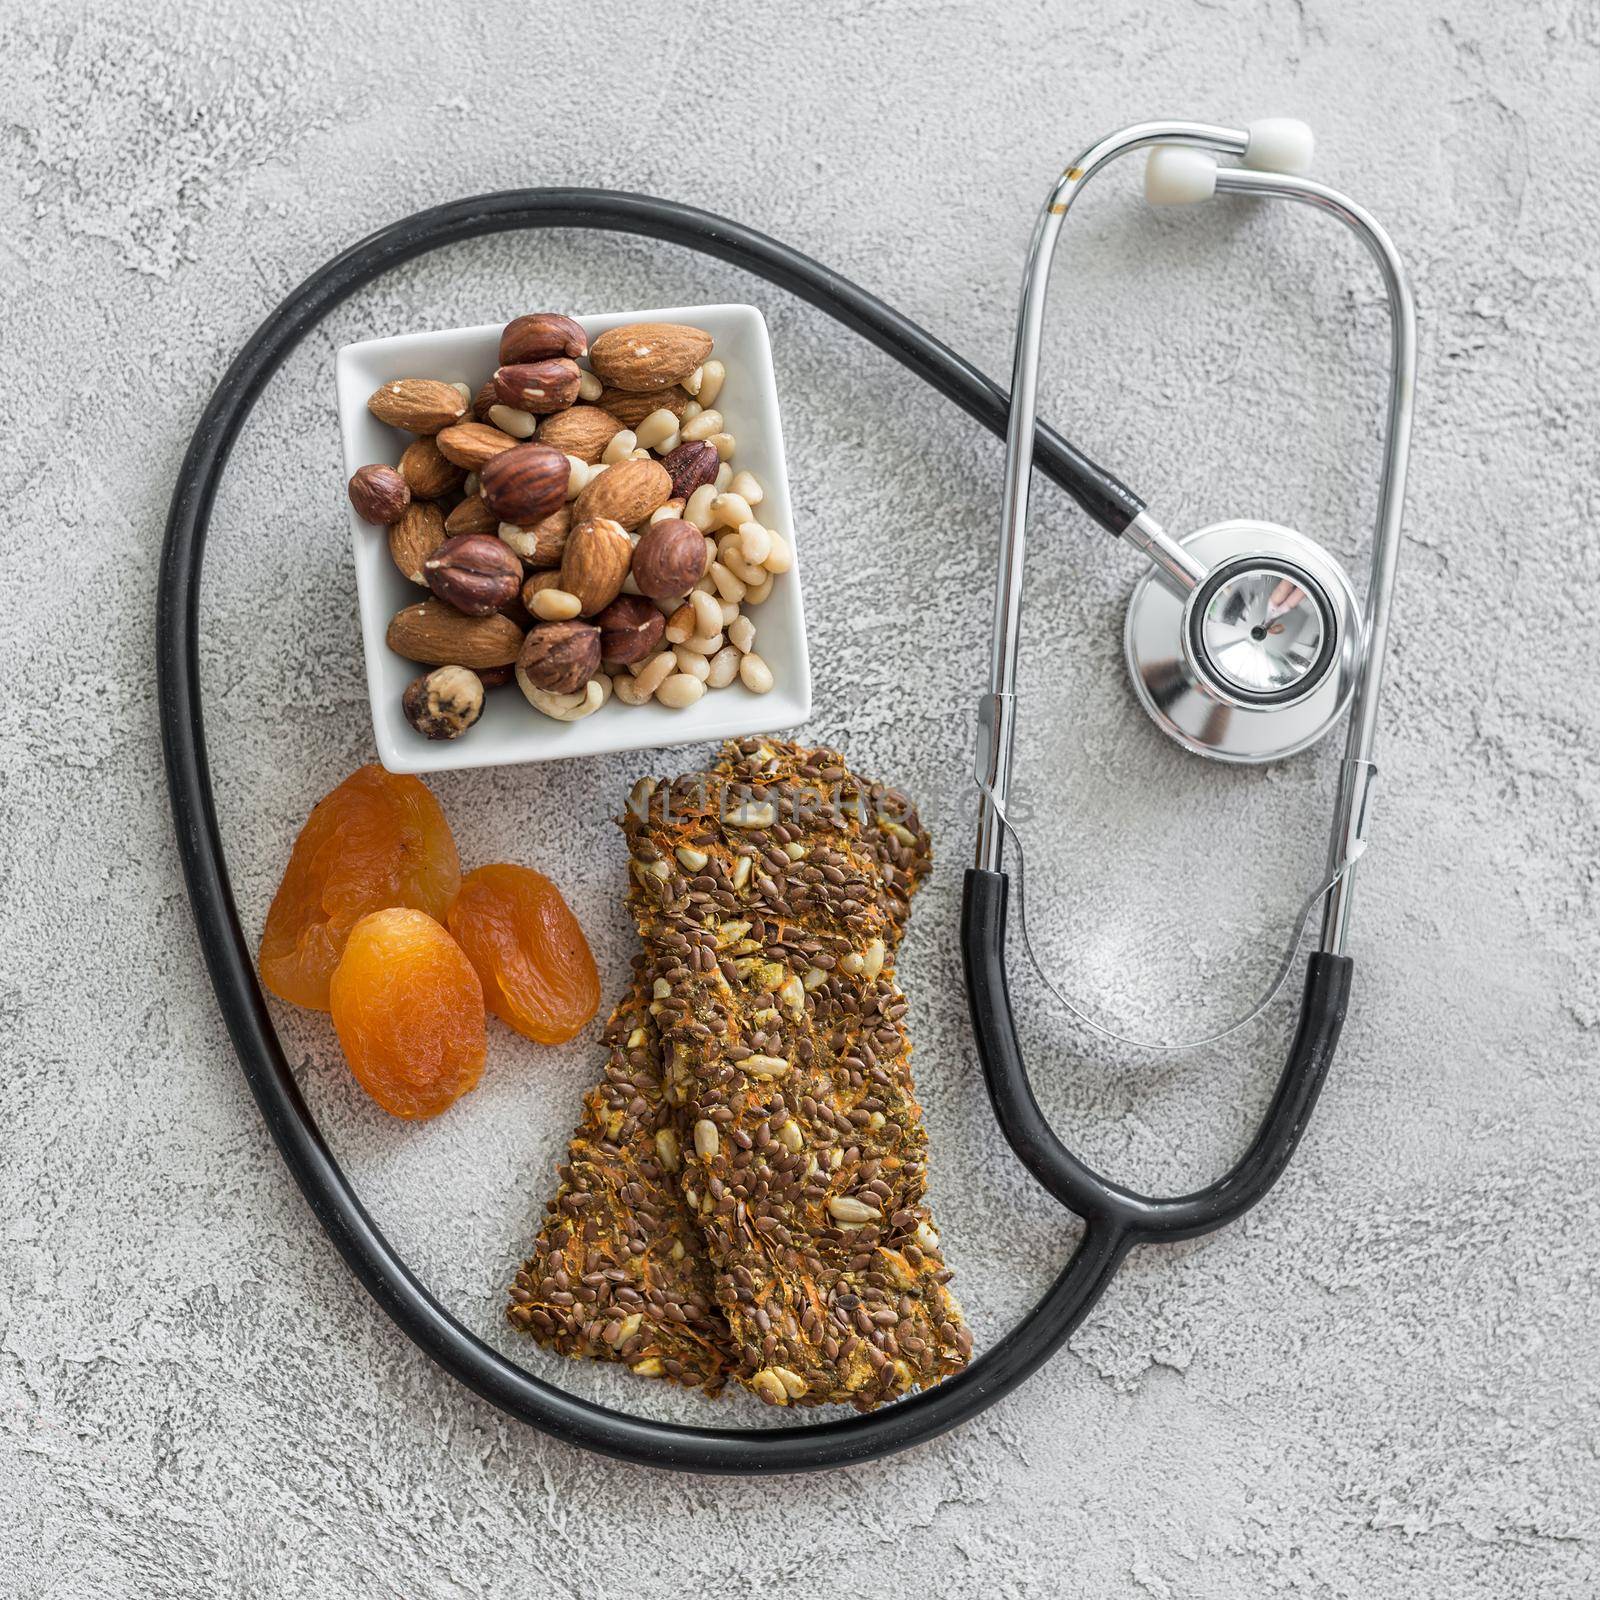 Stethoscope and heart with dried fruits and nuts on a gray background by tan4ikk1